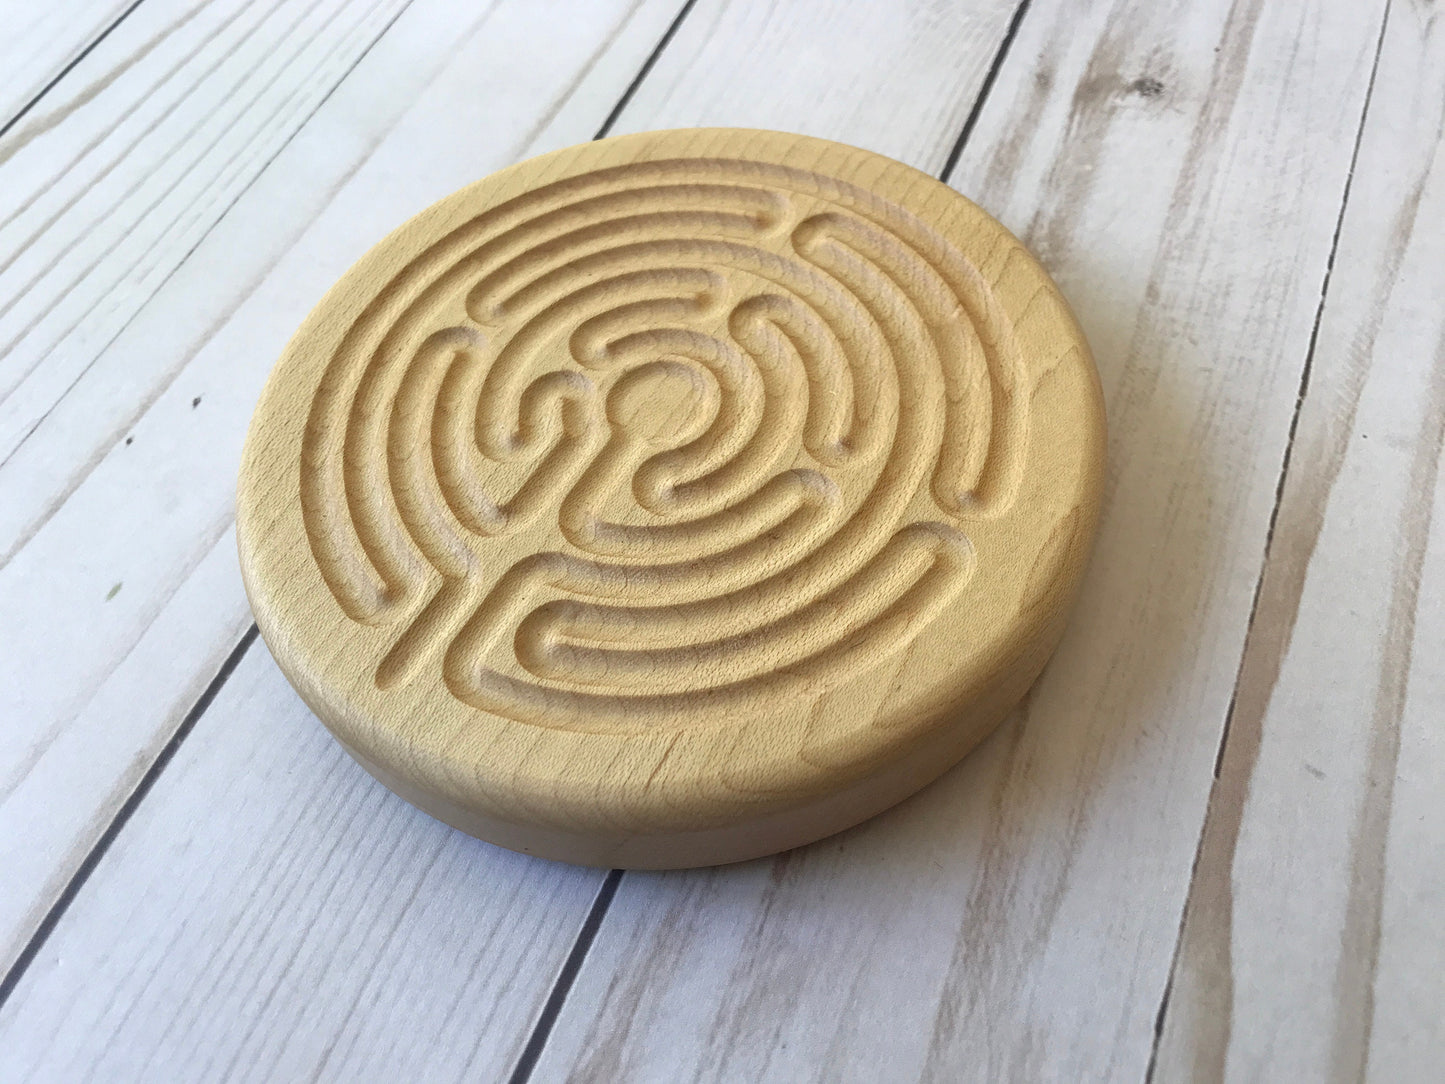 Small Chartres-style Finger Labyrinth, Maple Wood, 4.75" diameter